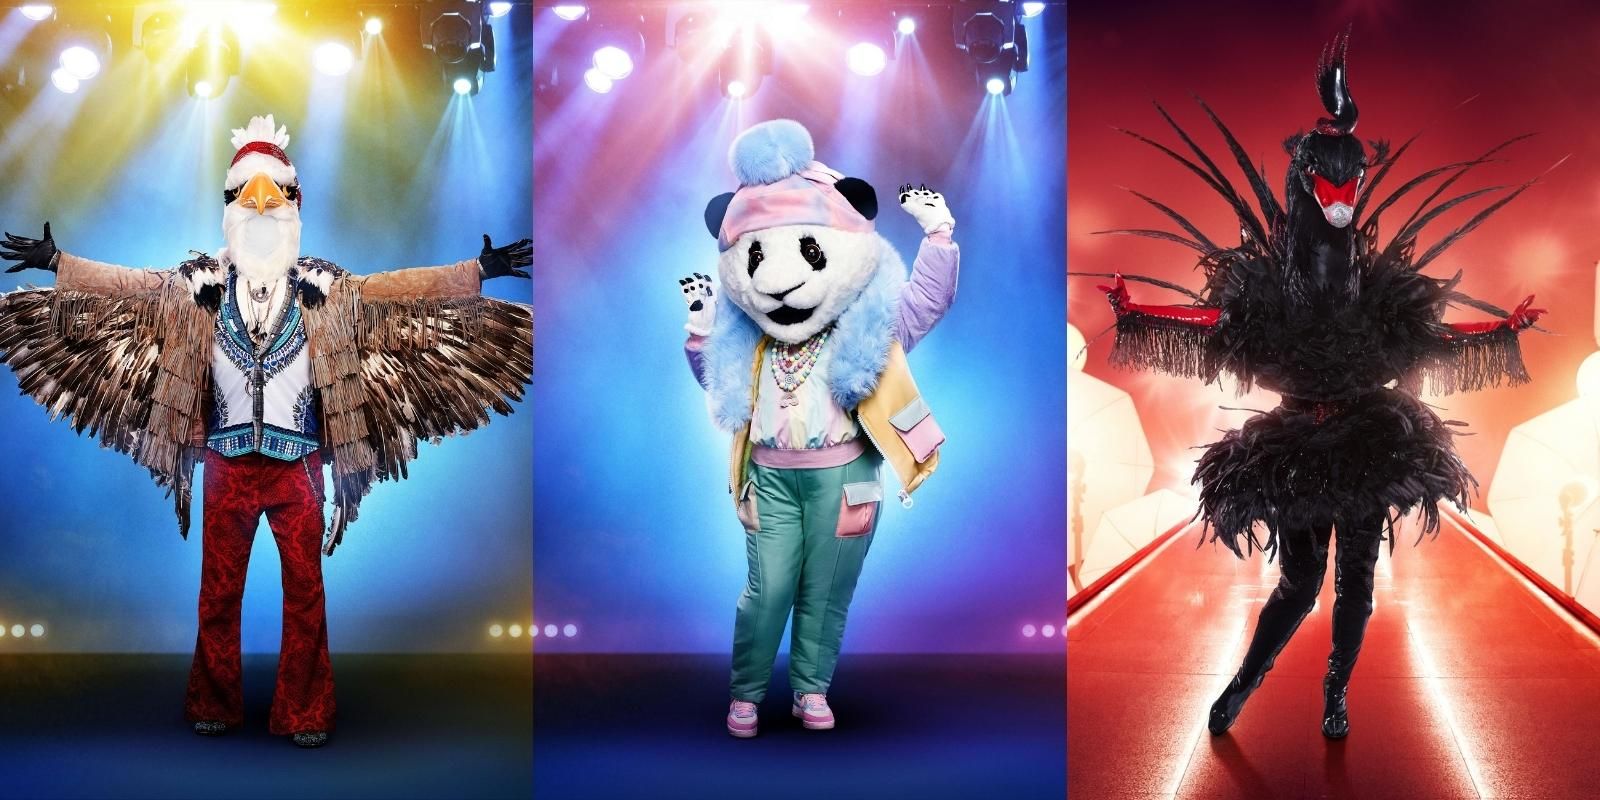 The Masked Singer The 10 Most Forgettable Contestants According To Reddit